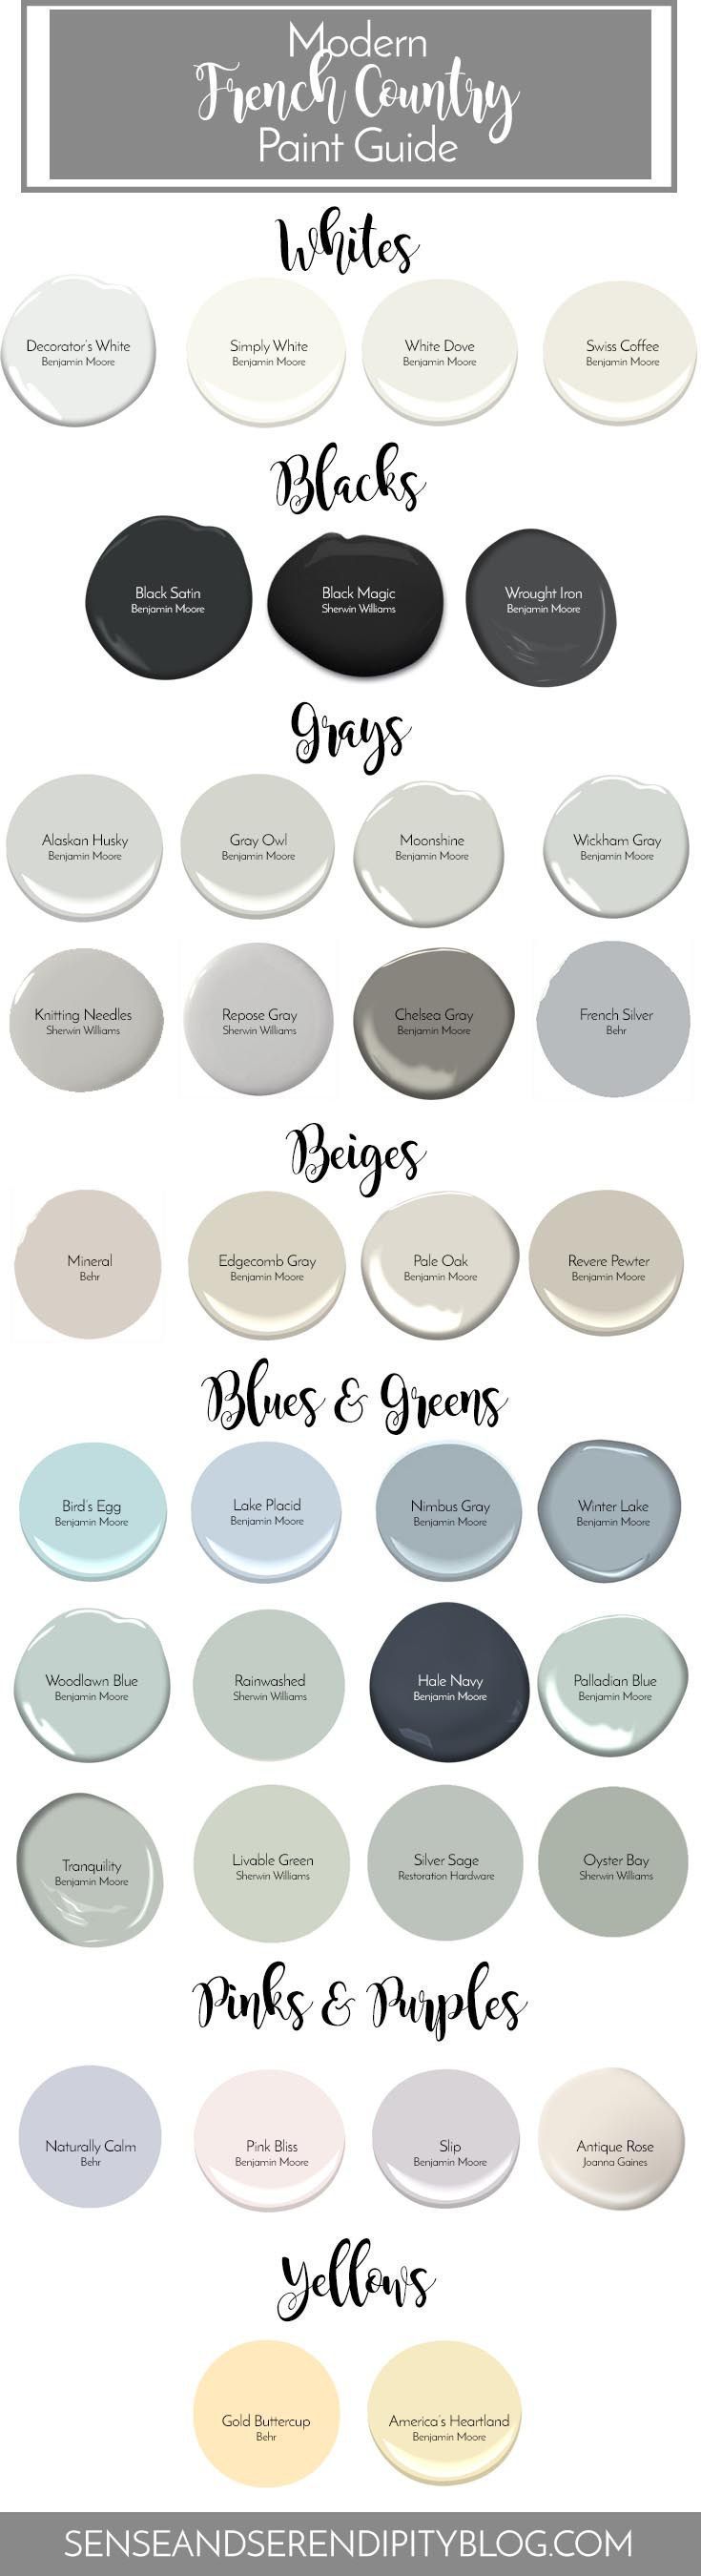 Modern French Country Paint Guide | Sense & Serendipity